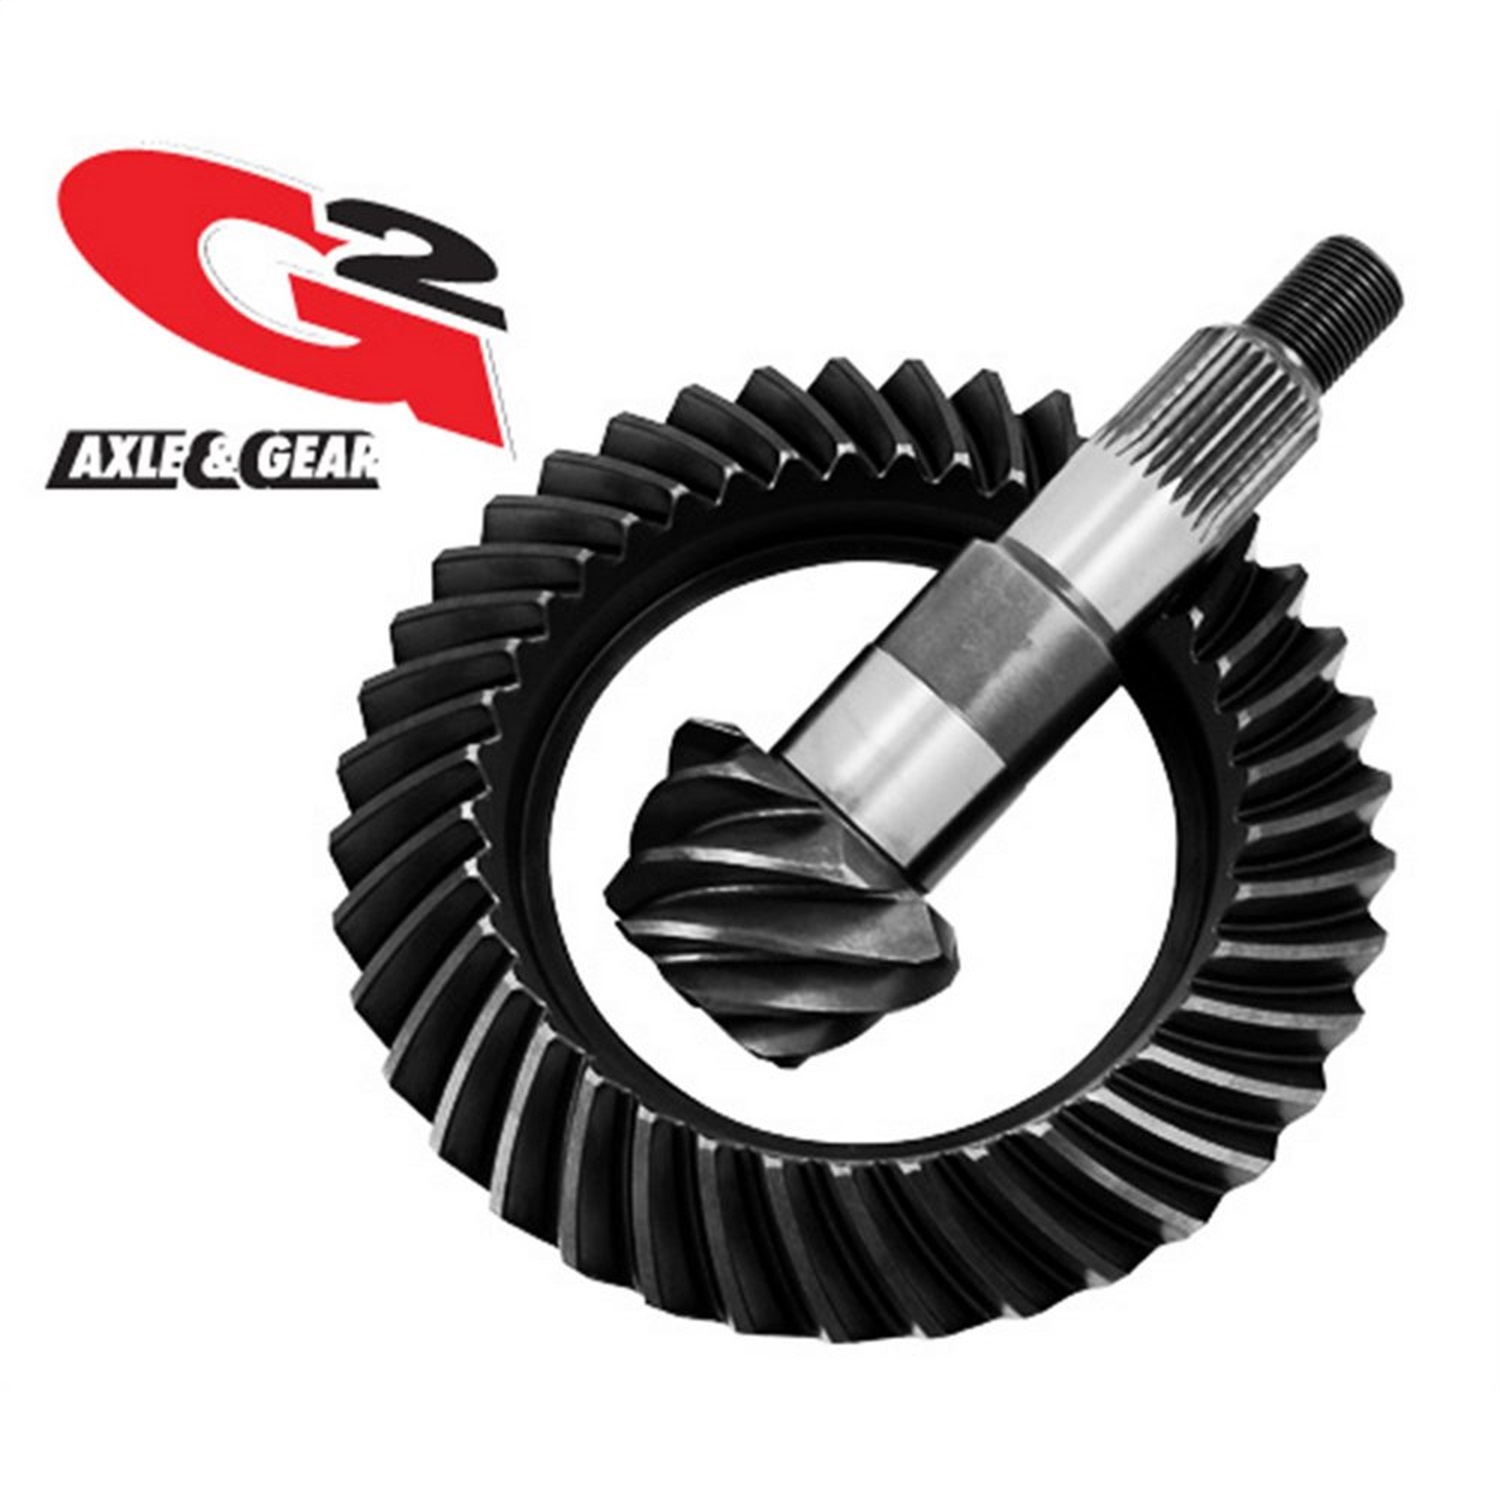 G2 Axle and Gear G2 Axle and Gear 2-2043-488 Ring and Pinion